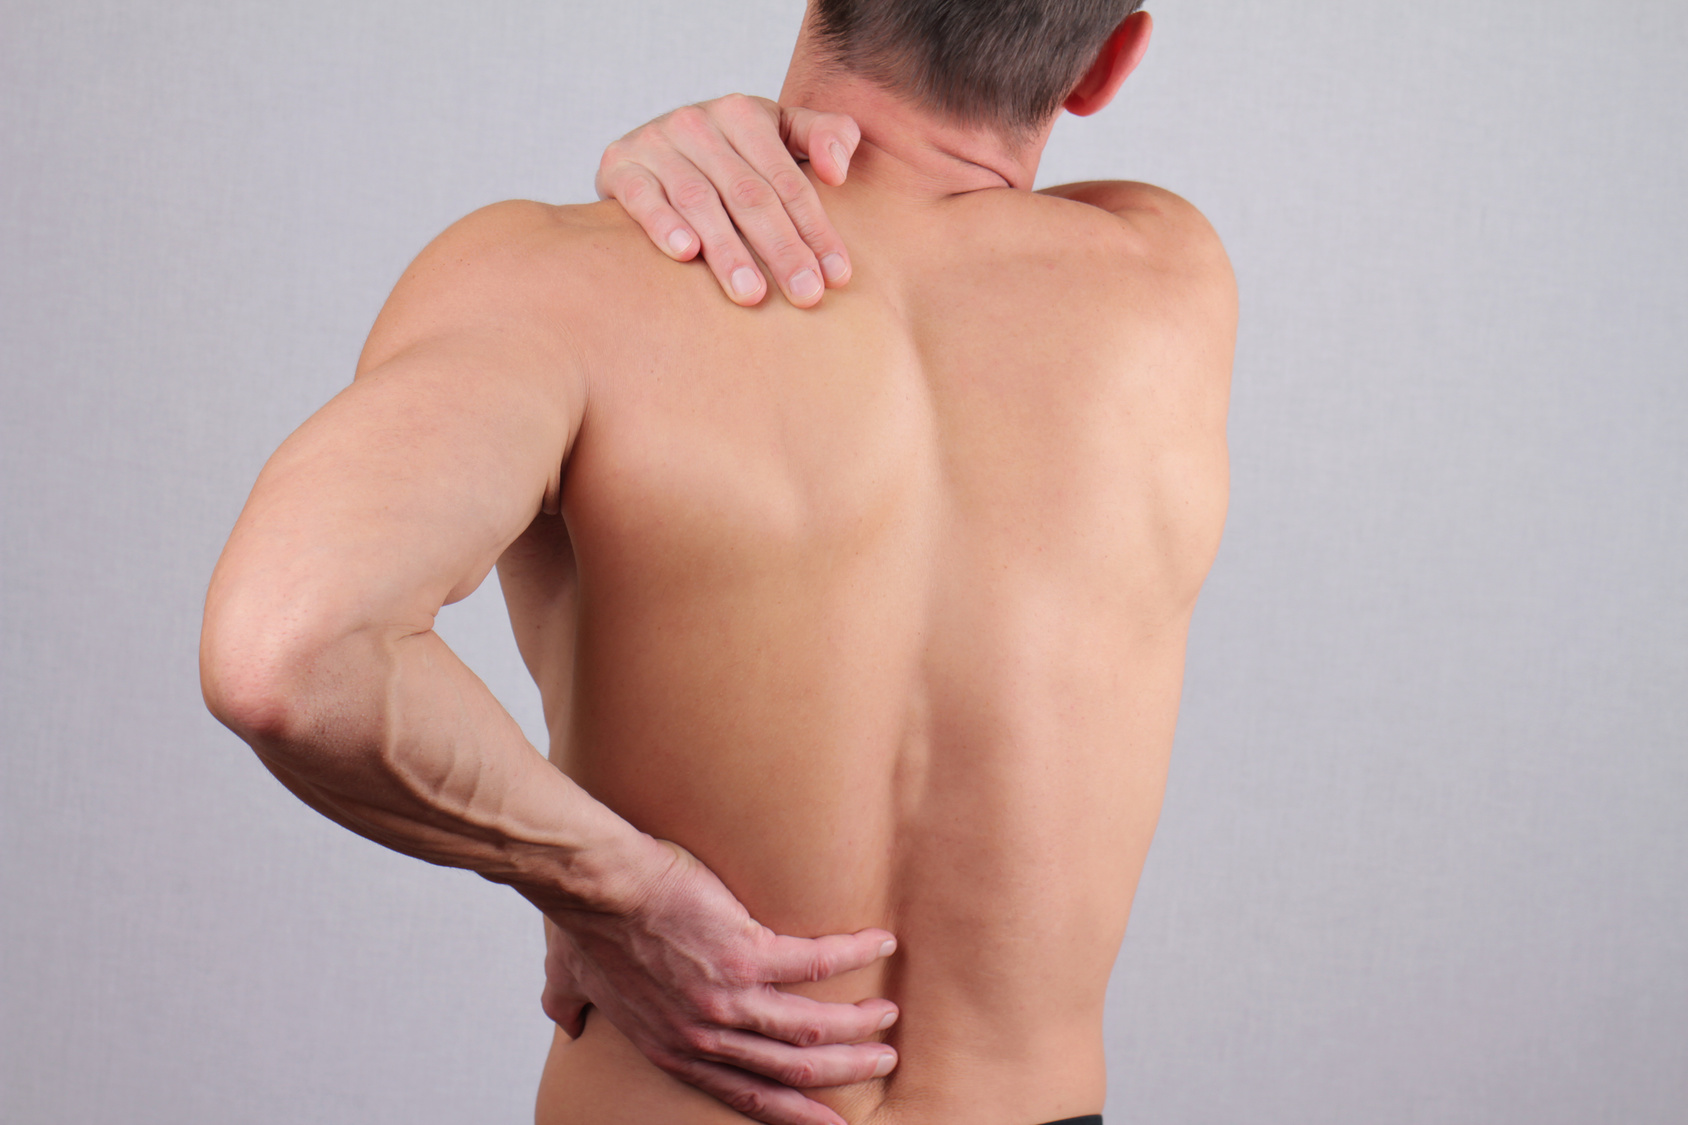 Man with neck and back pain. Man rubbing his painful back close up. Pain relief concept